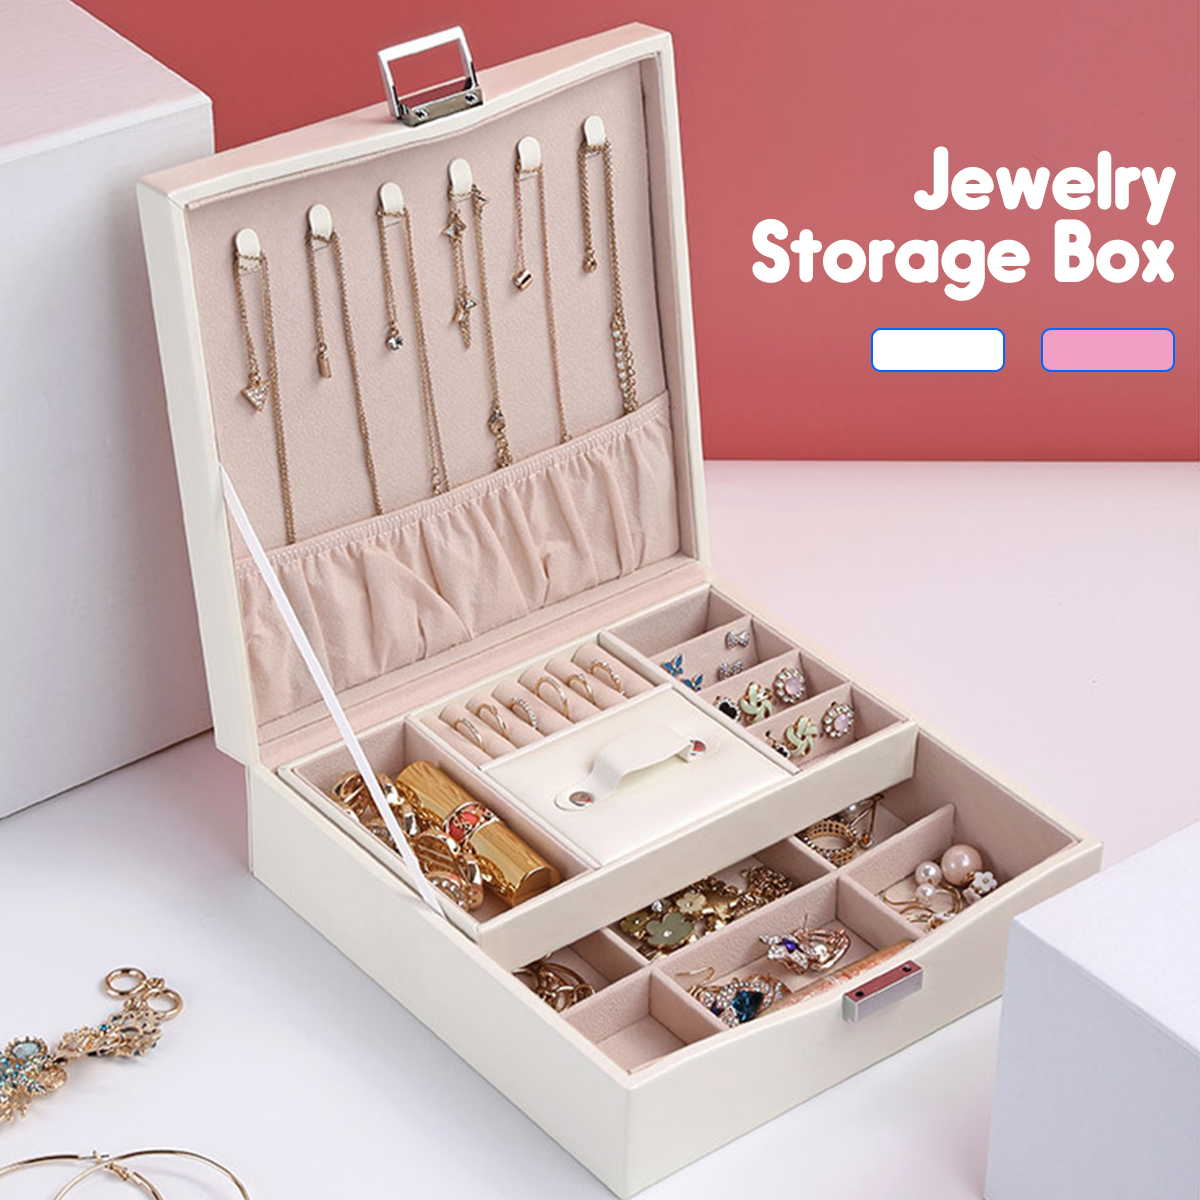 Flannel-Square-Jewelry-Box-Simple-Layout-2-Layers-Makeup-Organizer-Choker-Ring-Necklace-Storage-Box-1493604-1